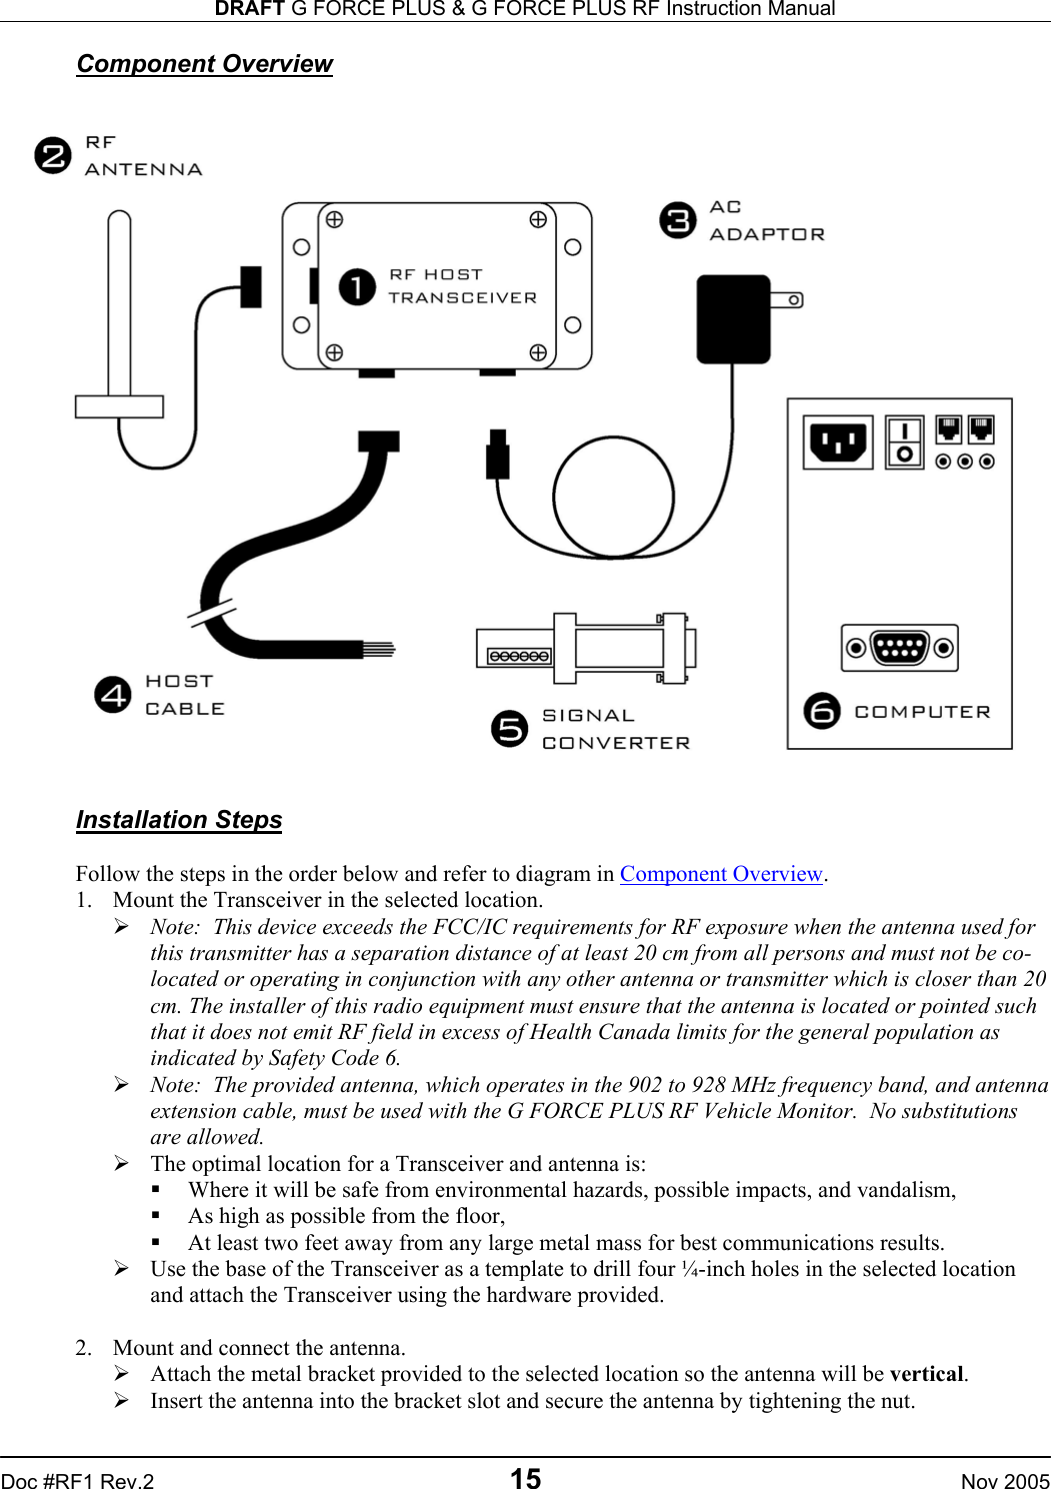 DRAFT G FORCE PLUS &amp; G FORCE PLUS RF Instruction Manual   Doc #RF1 Rev.2  15  Nov 2005 Component Overview    Installation Steps  Follow the steps in the order below and refer to diagram in Component Overview. 1.  Mount the Transceiver in the selected location.  Note:  This device exceeds the FCC/IC requirements for RF exposure when the antenna used for this transmitter has a separation distance of at least 20 cm from all persons and must not be co-located or operating in conjunction with any other antenna or transmitter which is closer than 20 cm. The installer of this radio equipment must ensure that the antenna is located or pointed such that it does not emit RF field in excess of Health Canada limits for the general population as indicated by Safety Code 6.  Note:  The provided antenna, which operates in the 902 to 928 MHz frequency band, and antenna extension cable, must be used with the G FORCE PLUS RF Vehicle Monitor.  No substitutions are allowed.  The optimal location for a Transceiver and antenna is:    Where it will be safe from environmental hazards, possible impacts, and vandalism,   As high as possible from the floor,   At least two feet away from any large metal mass for best communications results.  Use the base of the Transceiver as a template to drill four ¼-inch holes in the selected location and attach the Transceiver using the hardware provided.  2.  Mount and connect the antenna.  Attach the metal bracket provided to the selected location so the antenna will be vertical.  Insert the antenna into the bracket slot and secure the antenna by tightening the nut. 